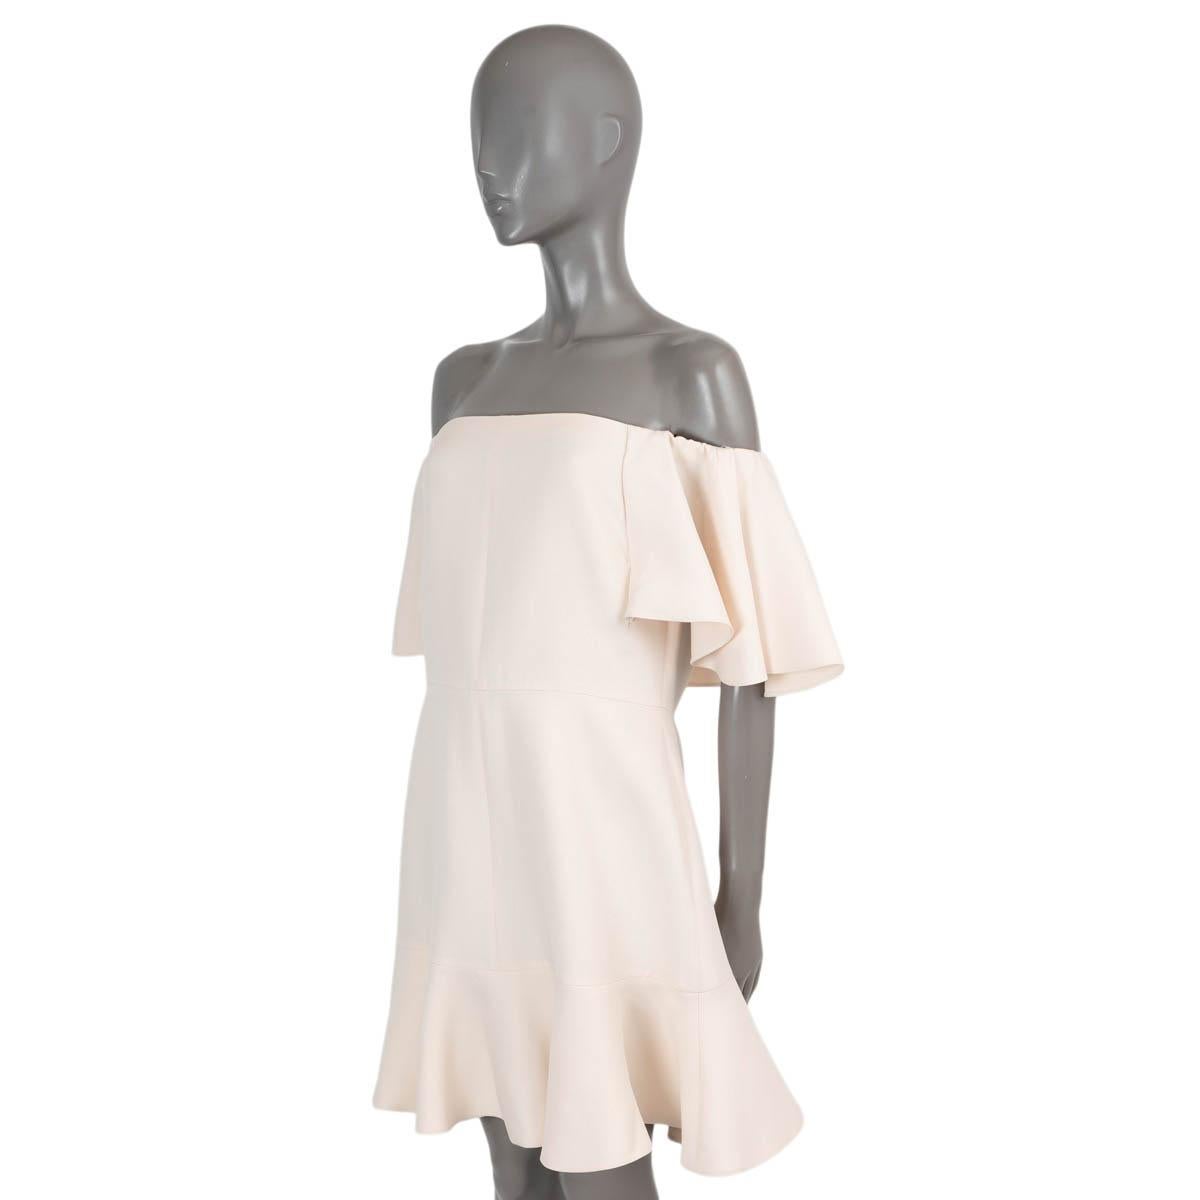 100% authentic Valentino off-shoulder dress in cream crêpe wool (65%) and silk (35%). Features ruffled short sleeves and fluted skirt. Opens with a concealed zipper in the back and is lined in silk (100%). Has been worn and is in excellent